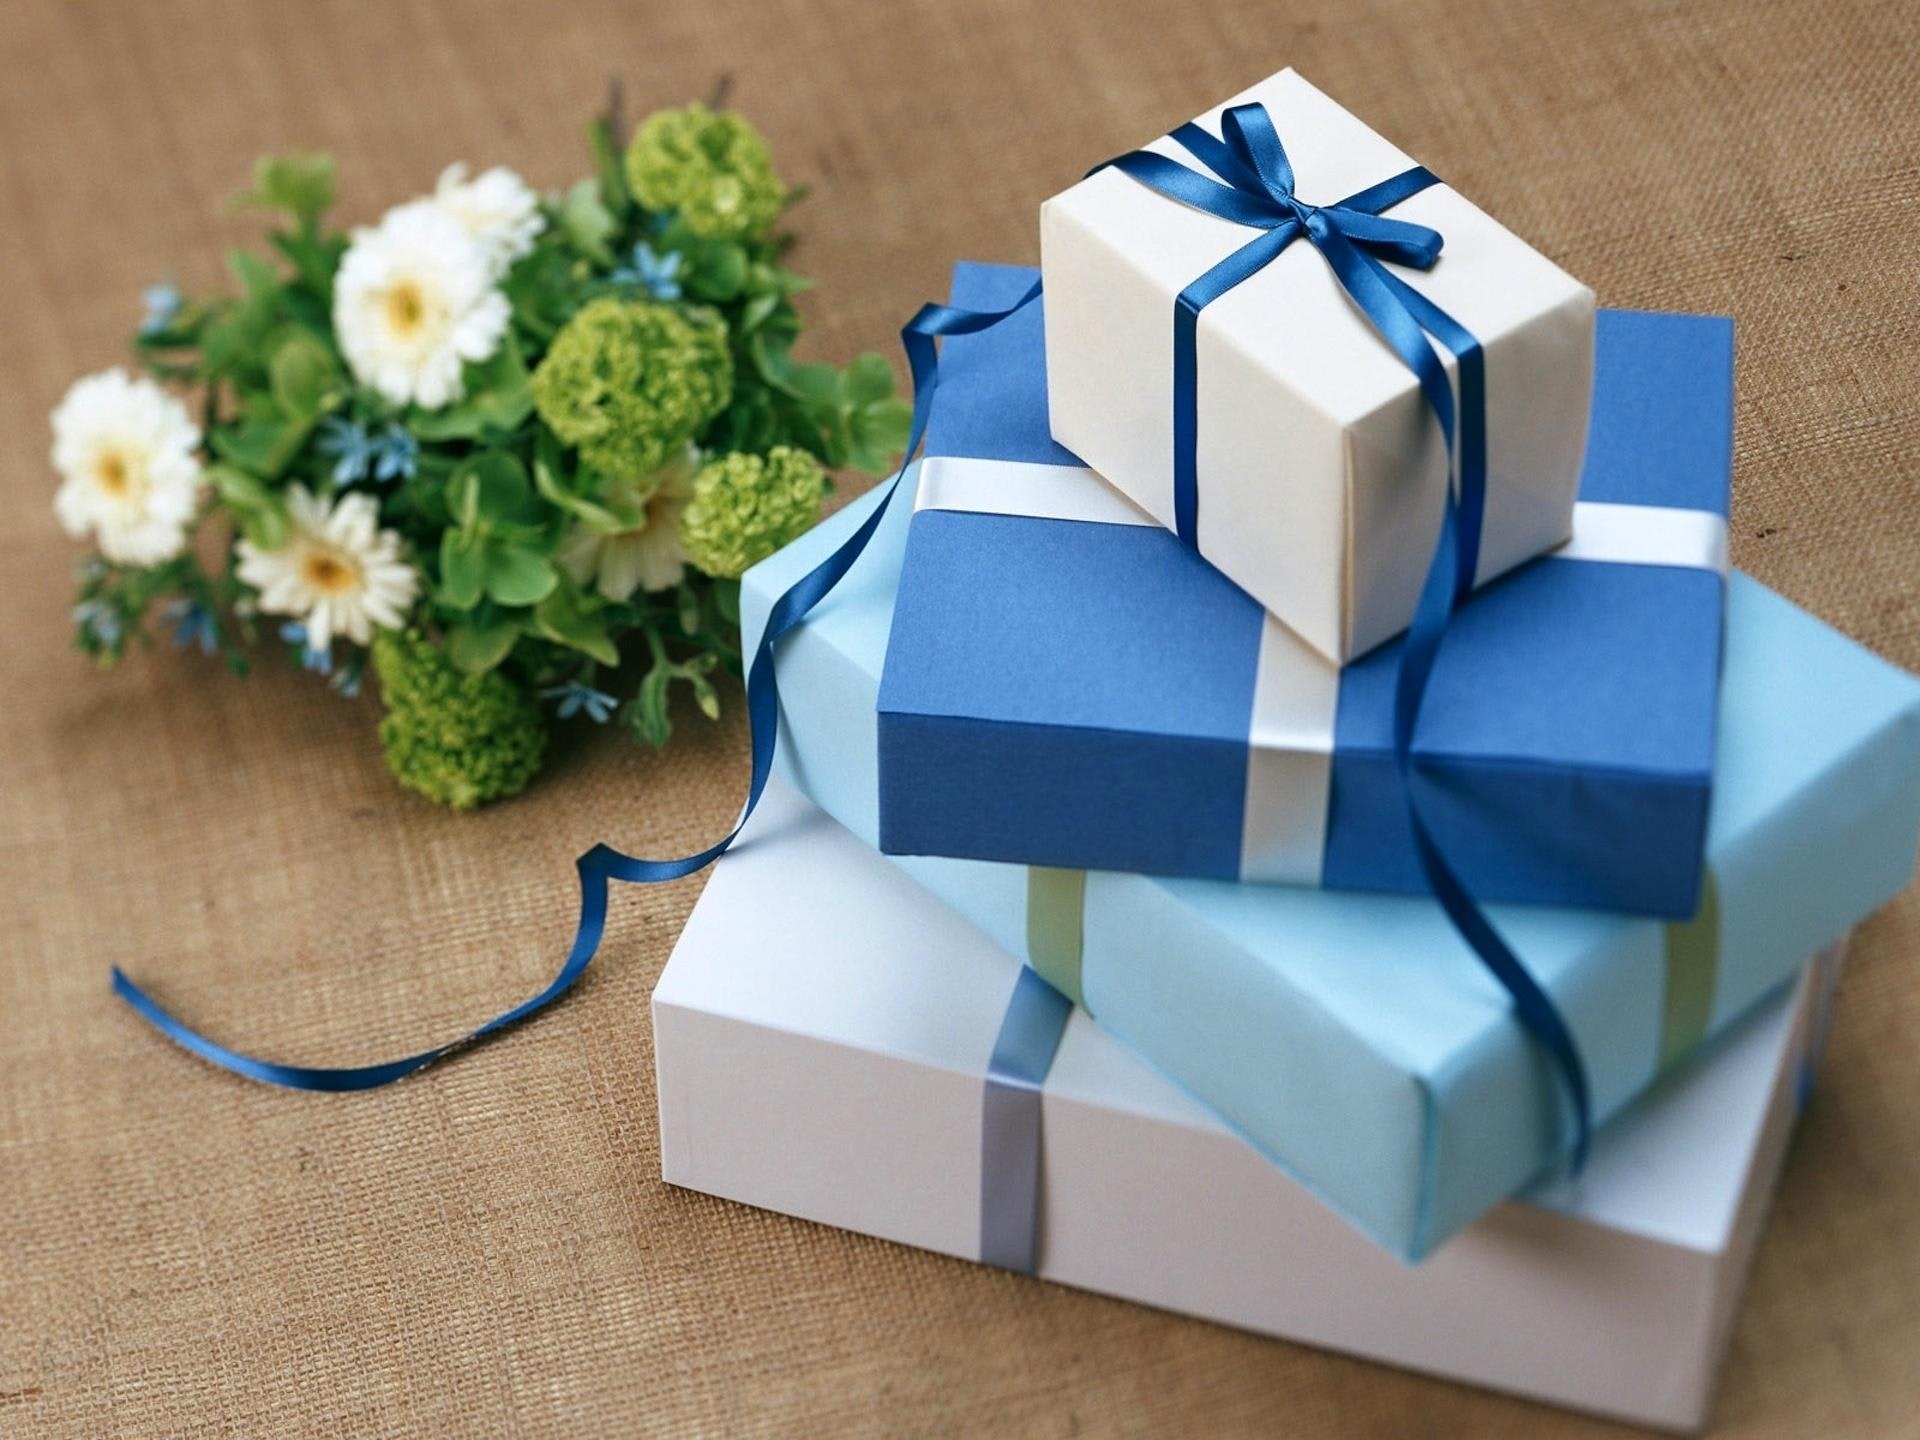 Blue and white gift boxes and a bouquet